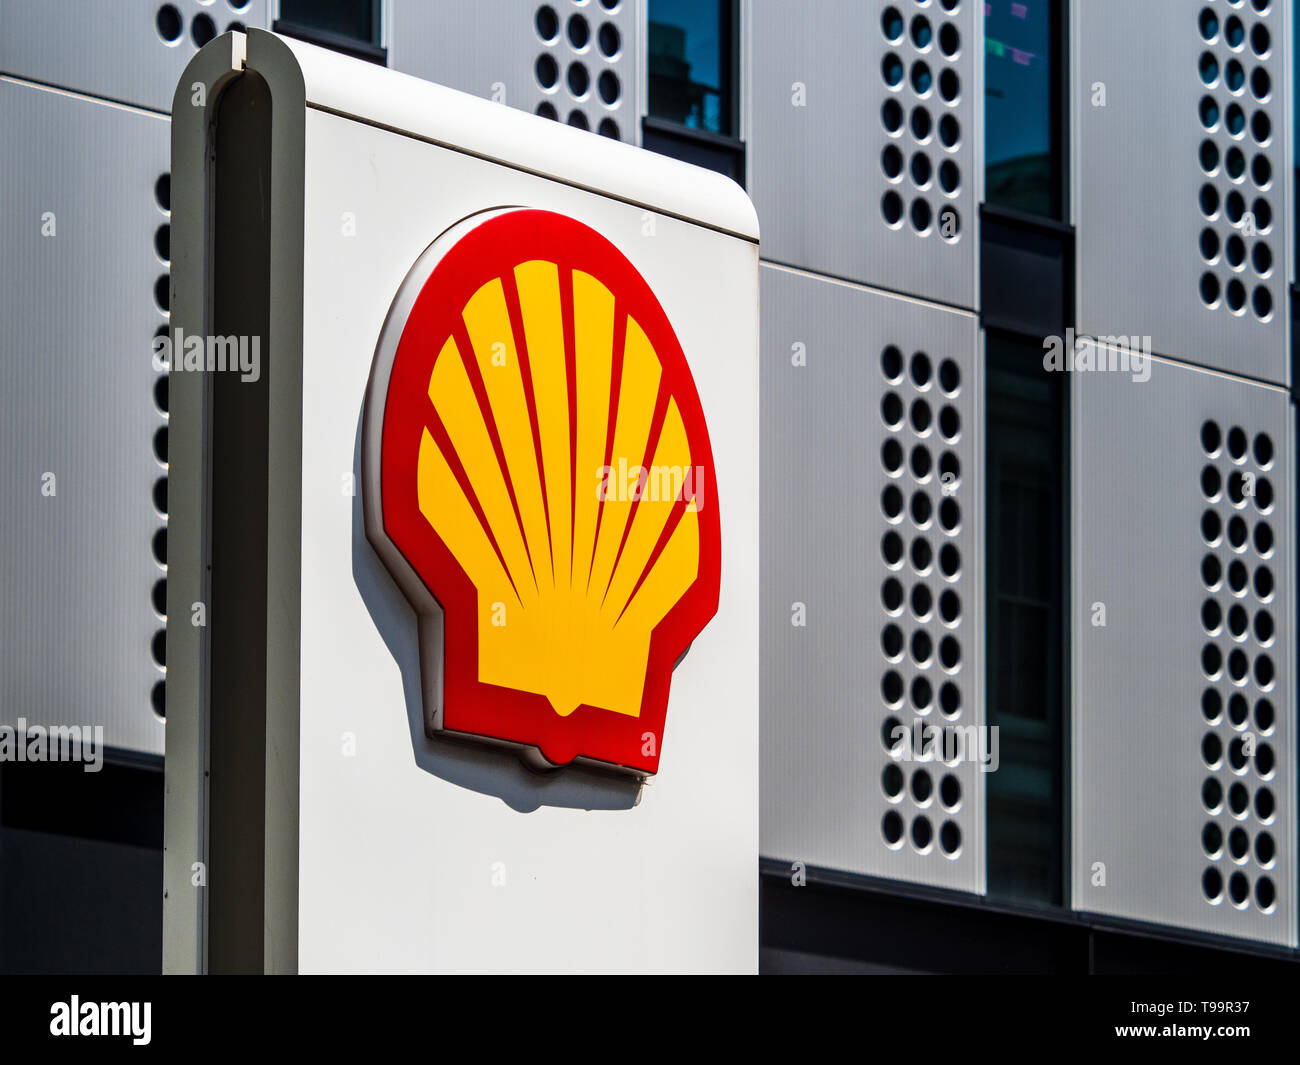 Shell Oil Company Logo on a filling station in London UK Stock Photo